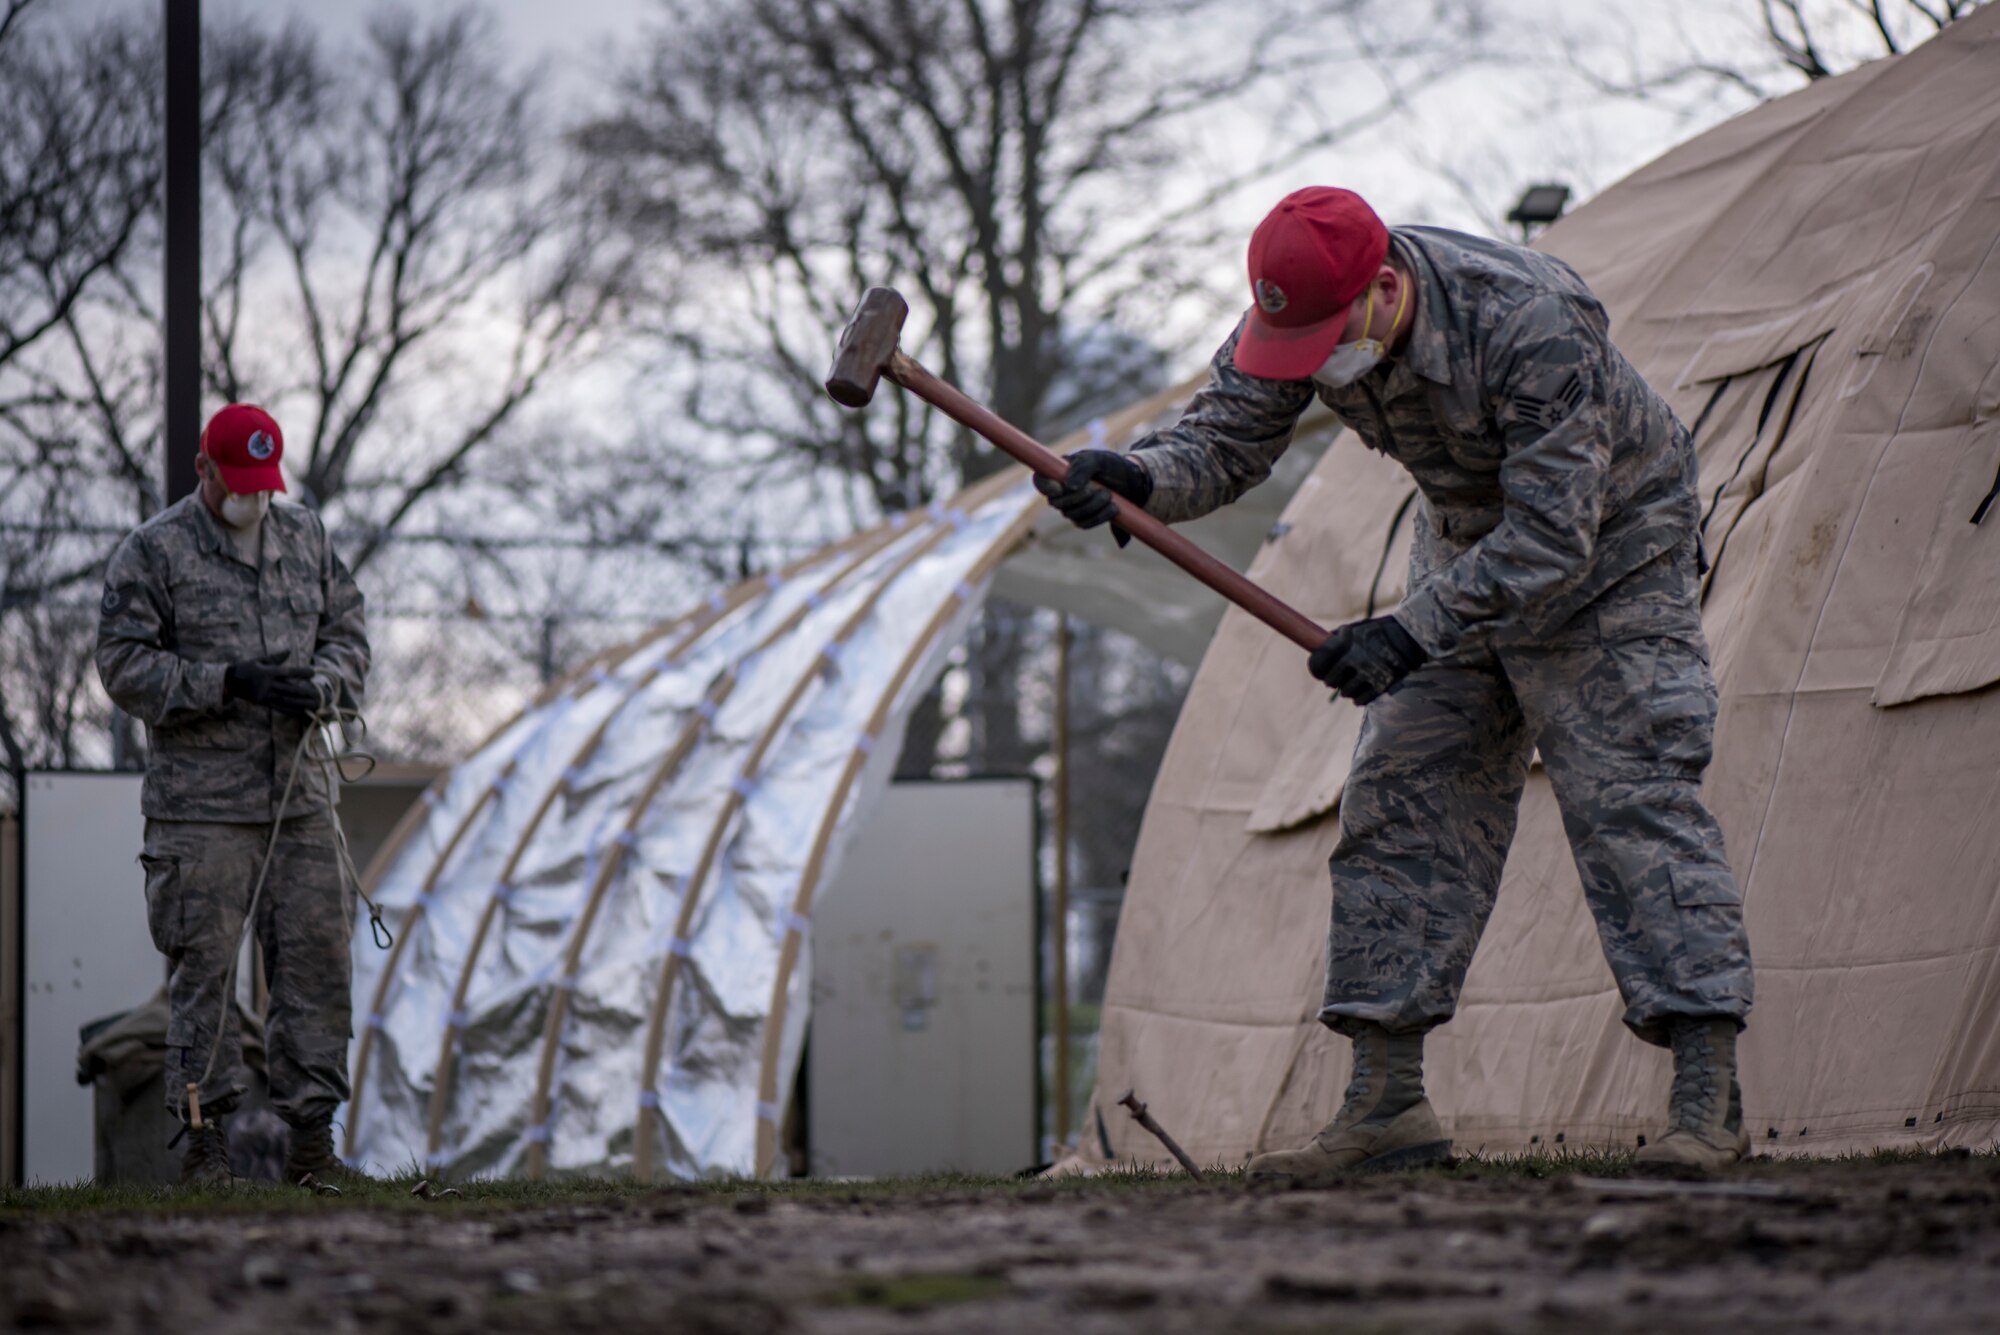 Senior Airman Michael Hyer stakes a tent down while working with Ohio National Guard members supporting the Ohio Department of Rehabilitation and Correction in response to confirmed COVID-19 cases at the Pickaway Correctional Institution, Orient, Ohio.